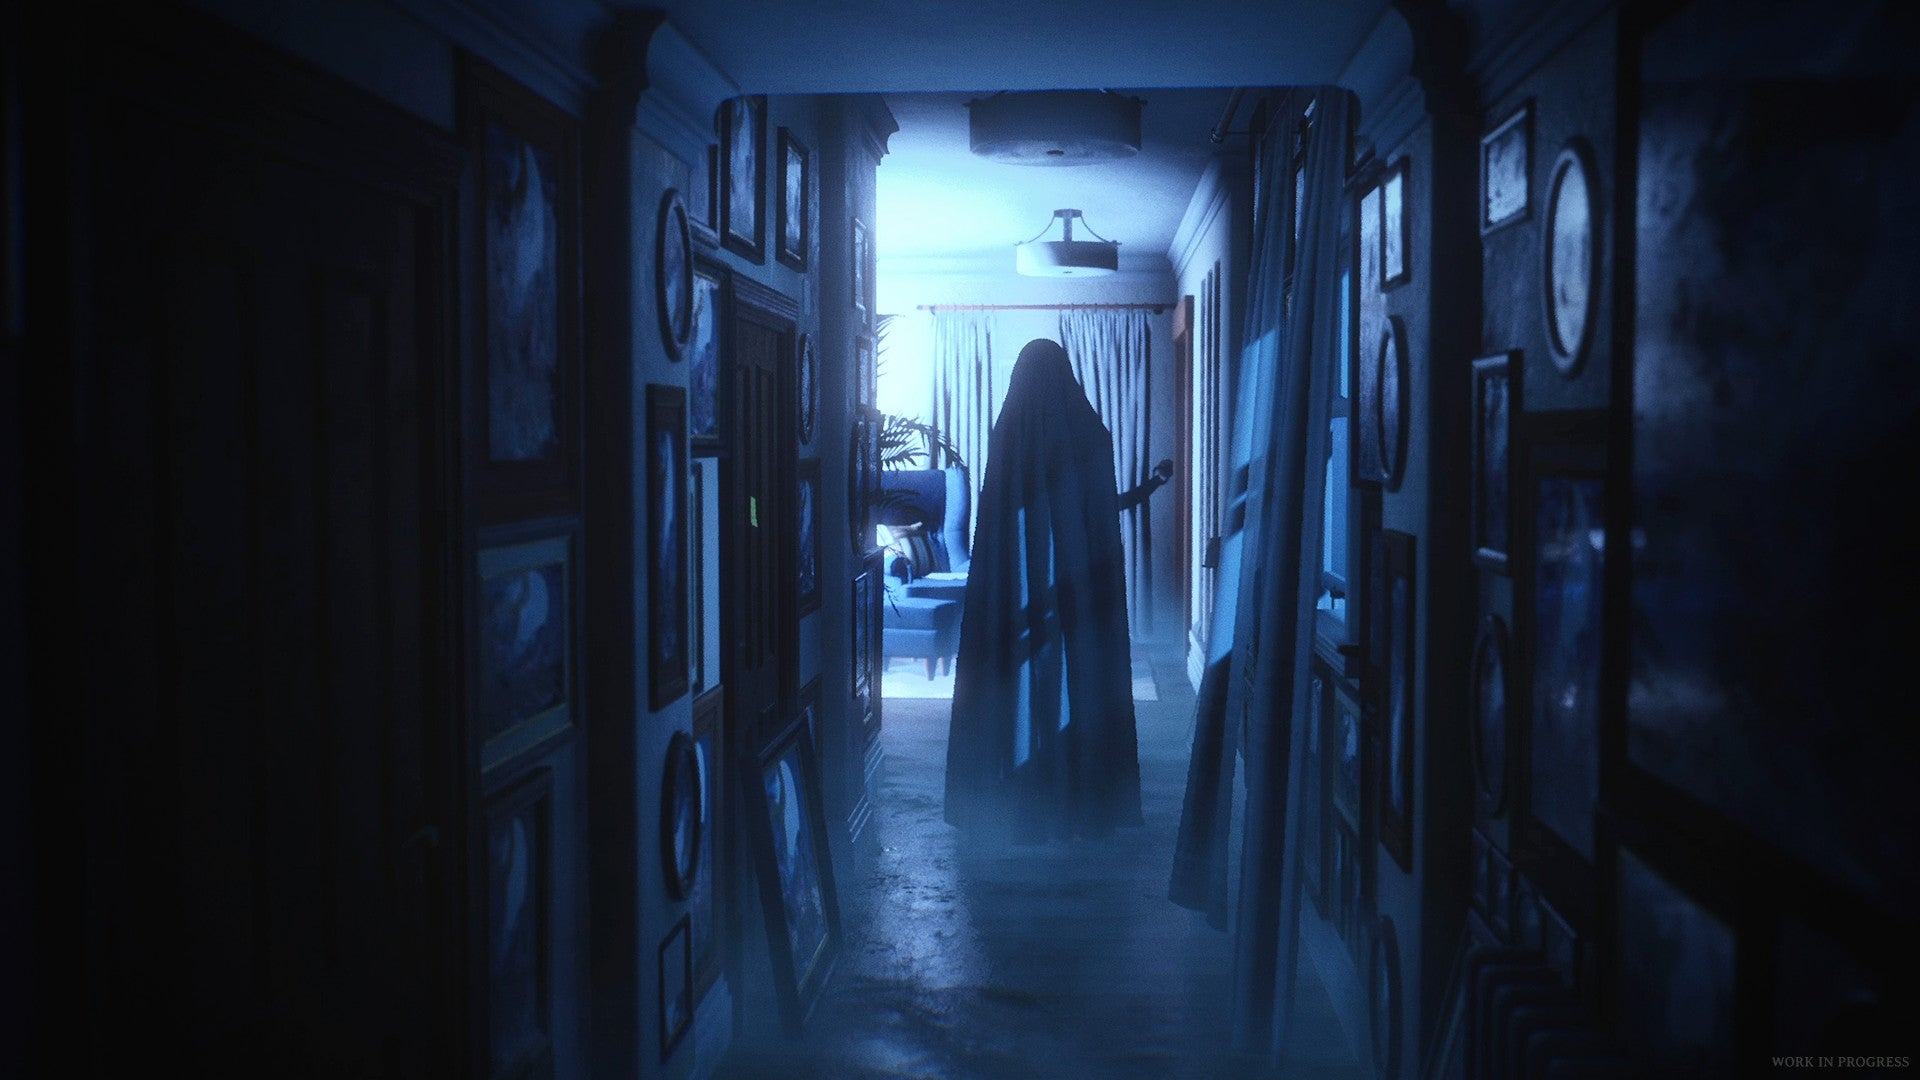 A blue-lit corridor has a ghostly figure at the end covered by a sheet in Luto.